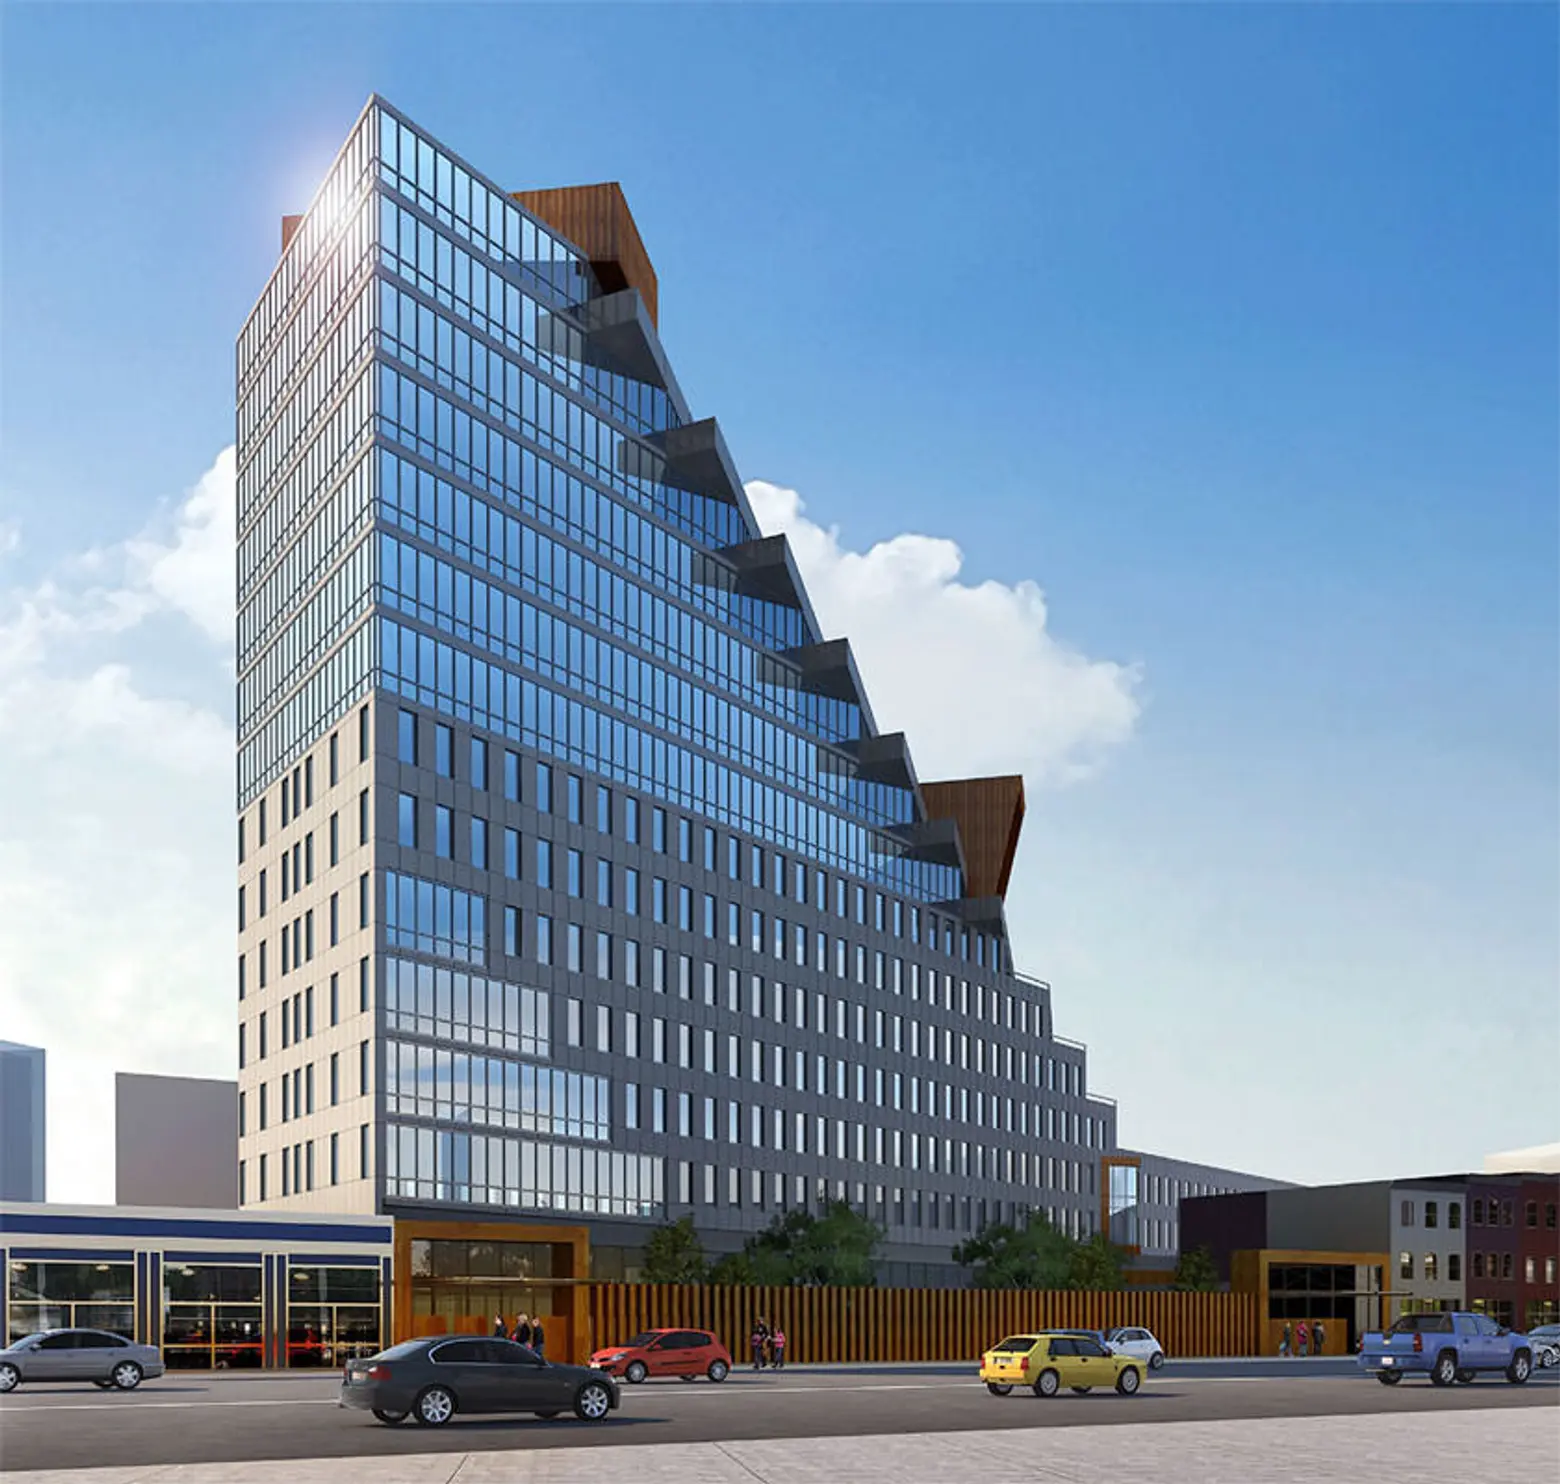 Williamsburg Hotel/Residential Tower at 500 Metropolitan Avenue Rises Above Ground